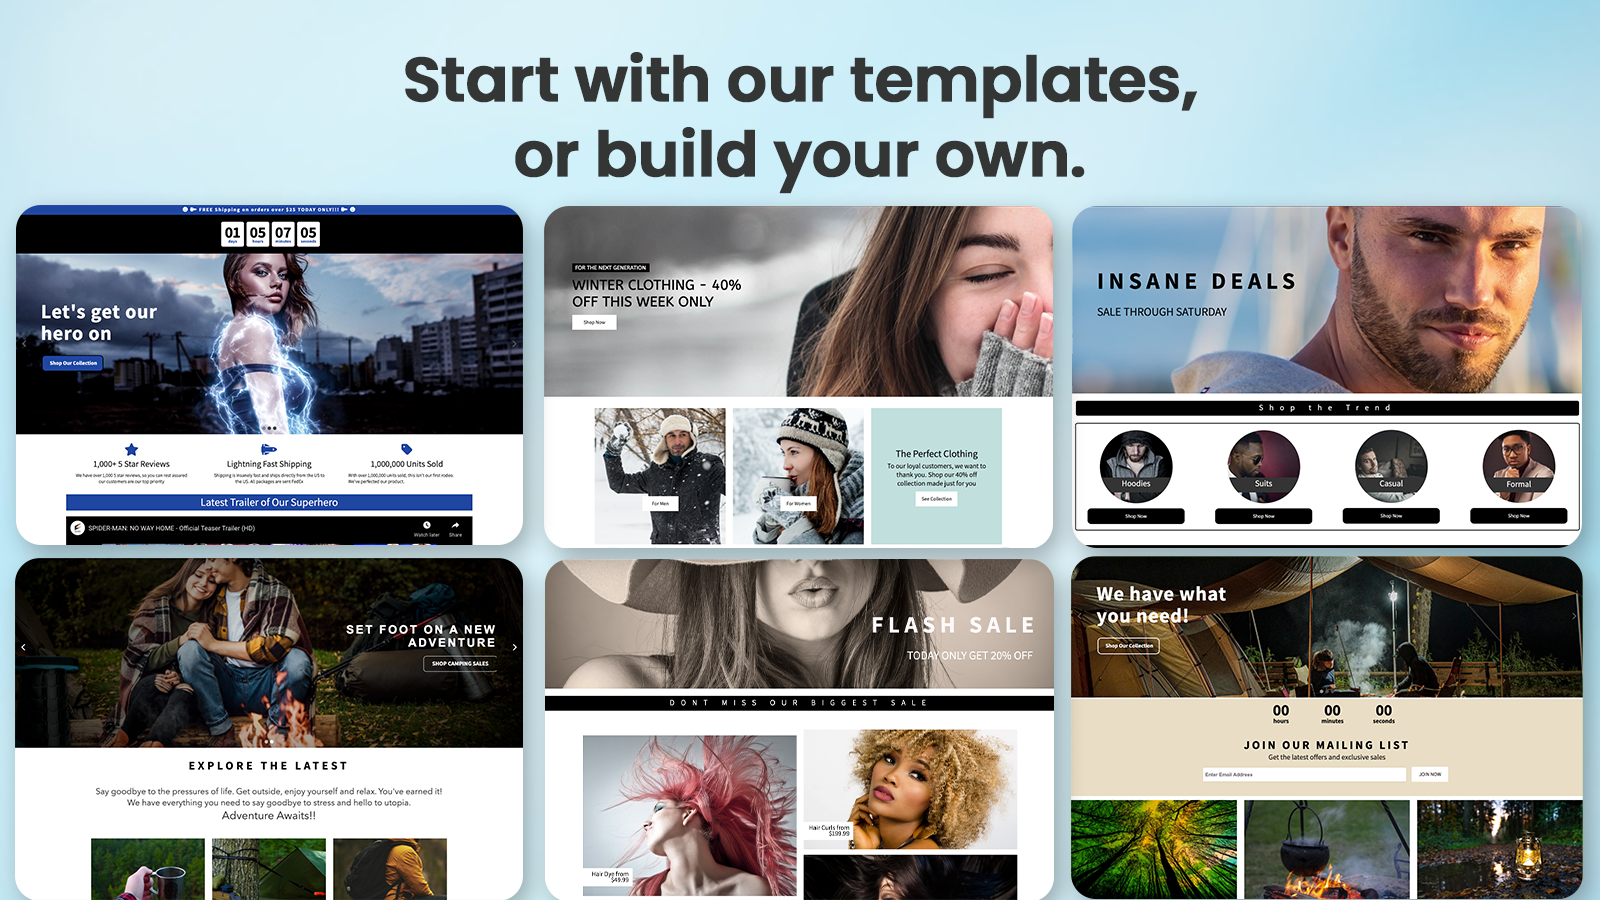 Start with our templates or build your own.